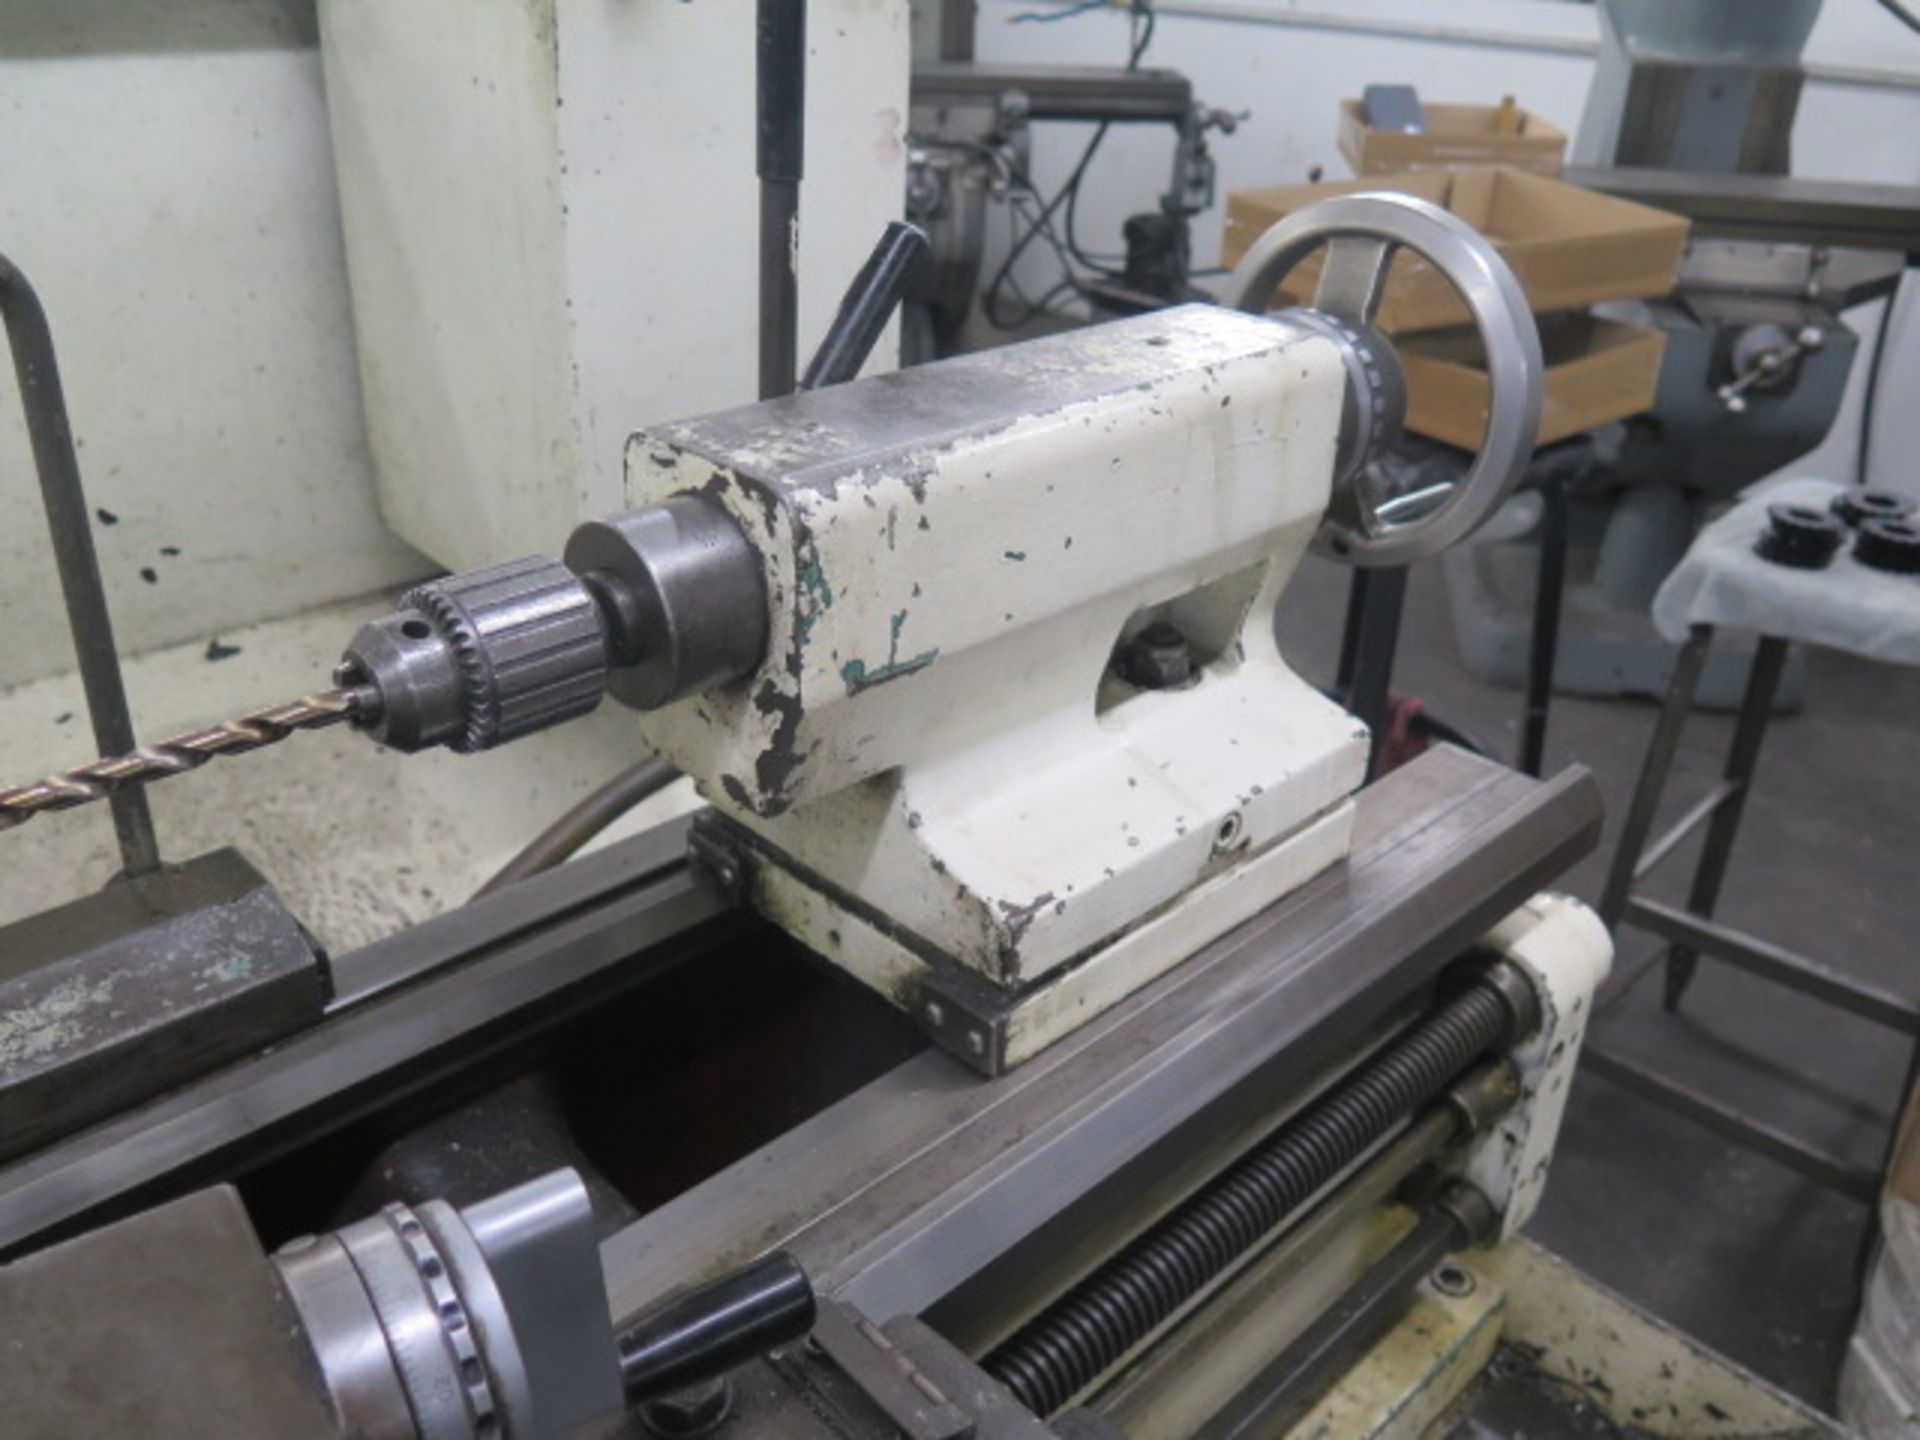 Harrison M350 15” x 42” Lathe w/ 40-2200 RPM, Inch/mm Threading, Tailstock, Steady Rest, SOLD AS IS - Image 10 of 17